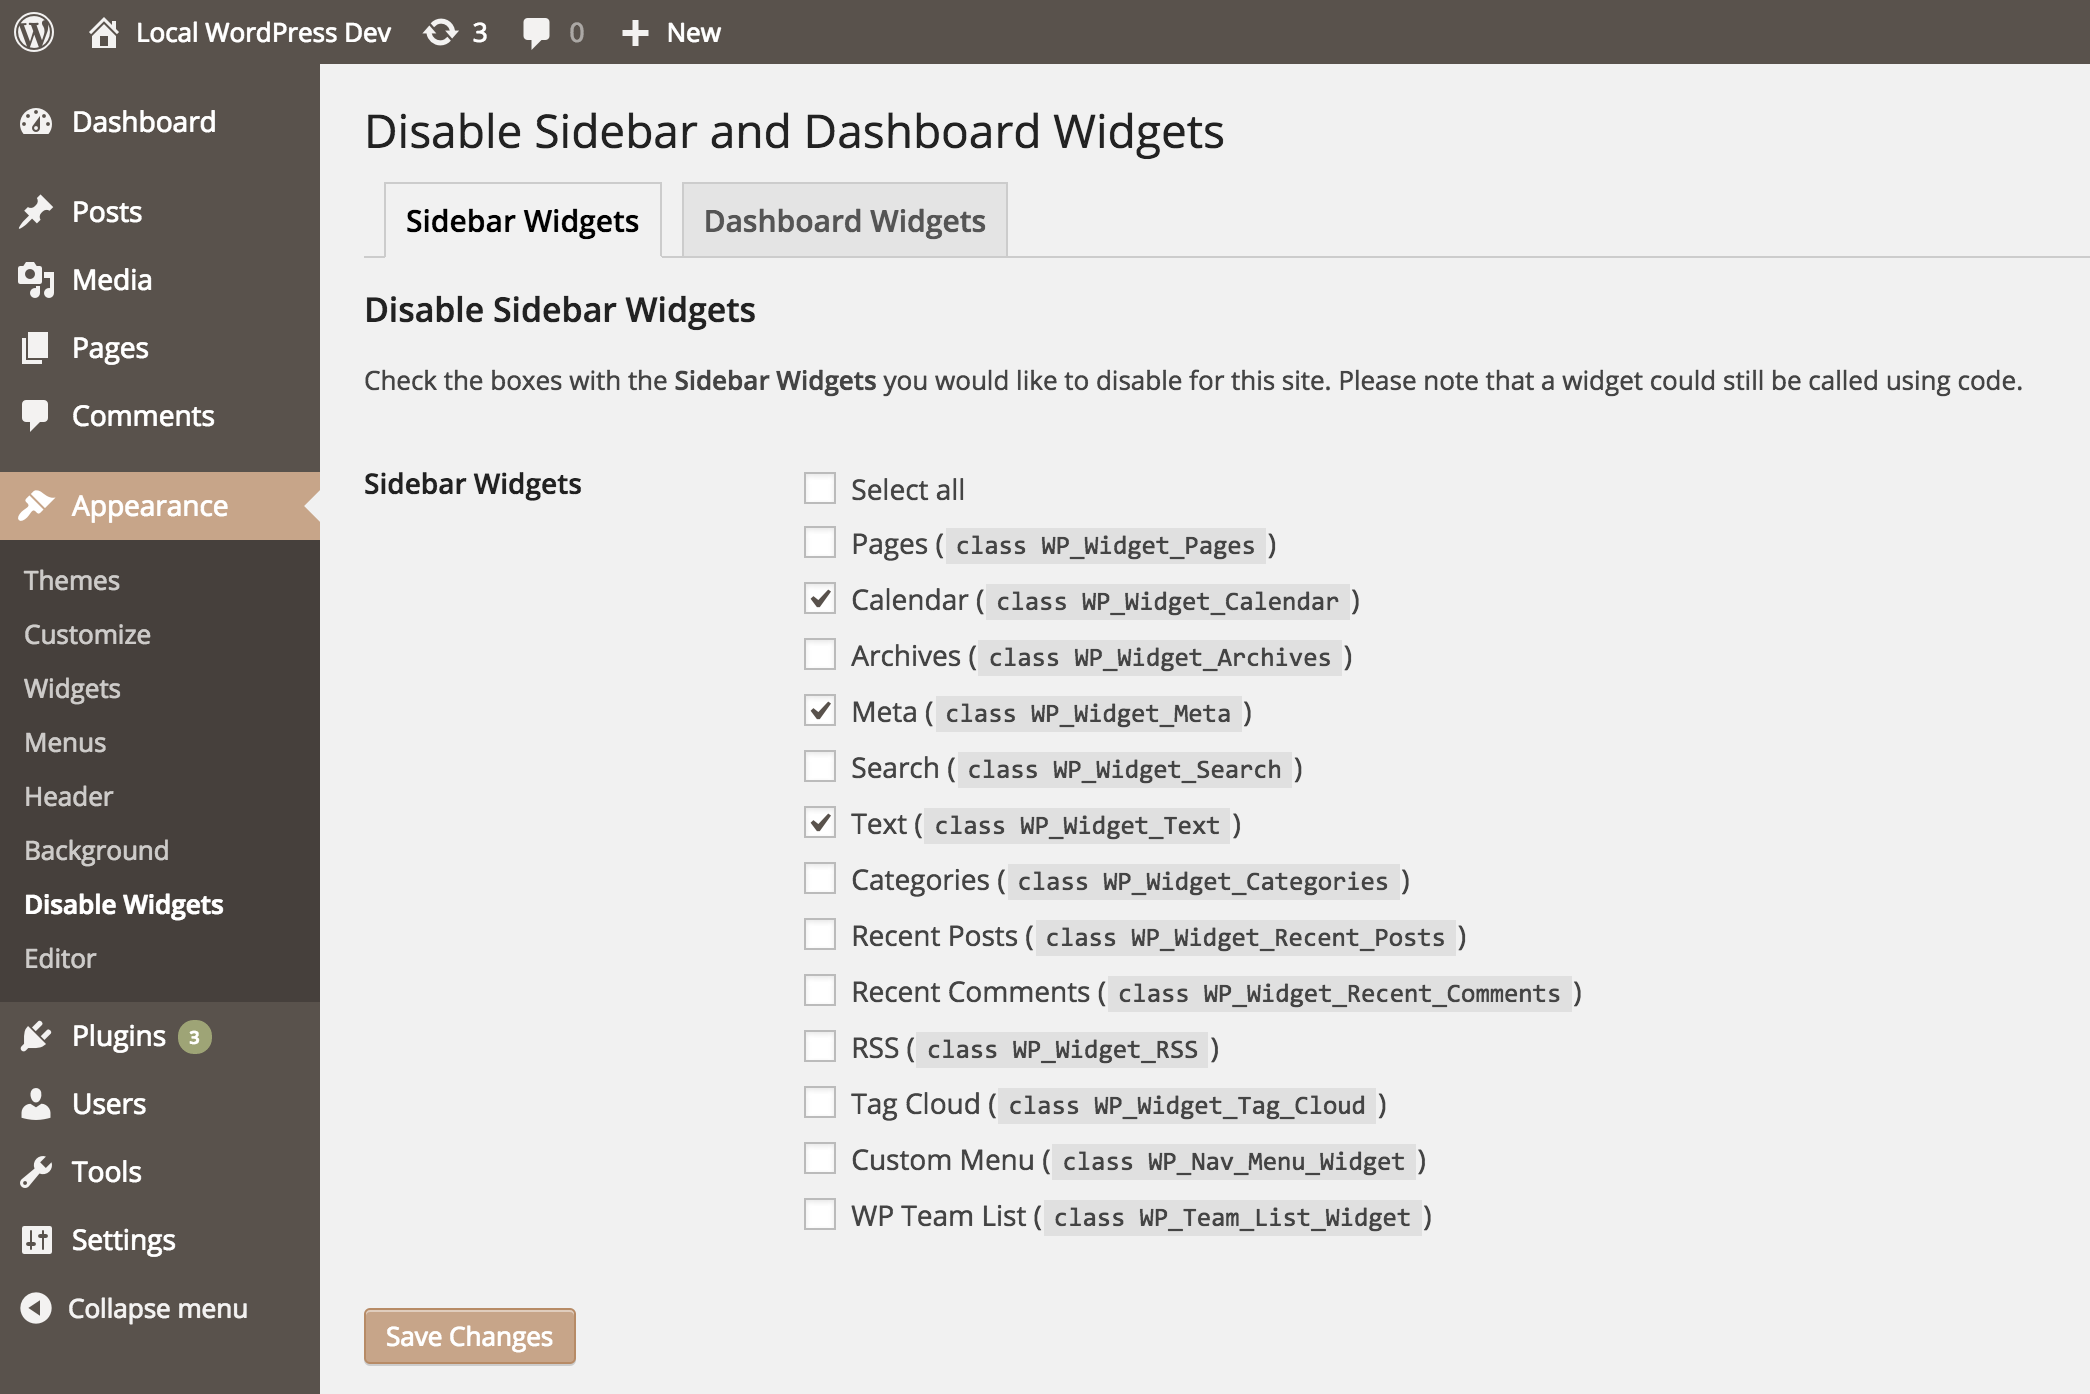 Disable the sidebar widgets you don’t need.